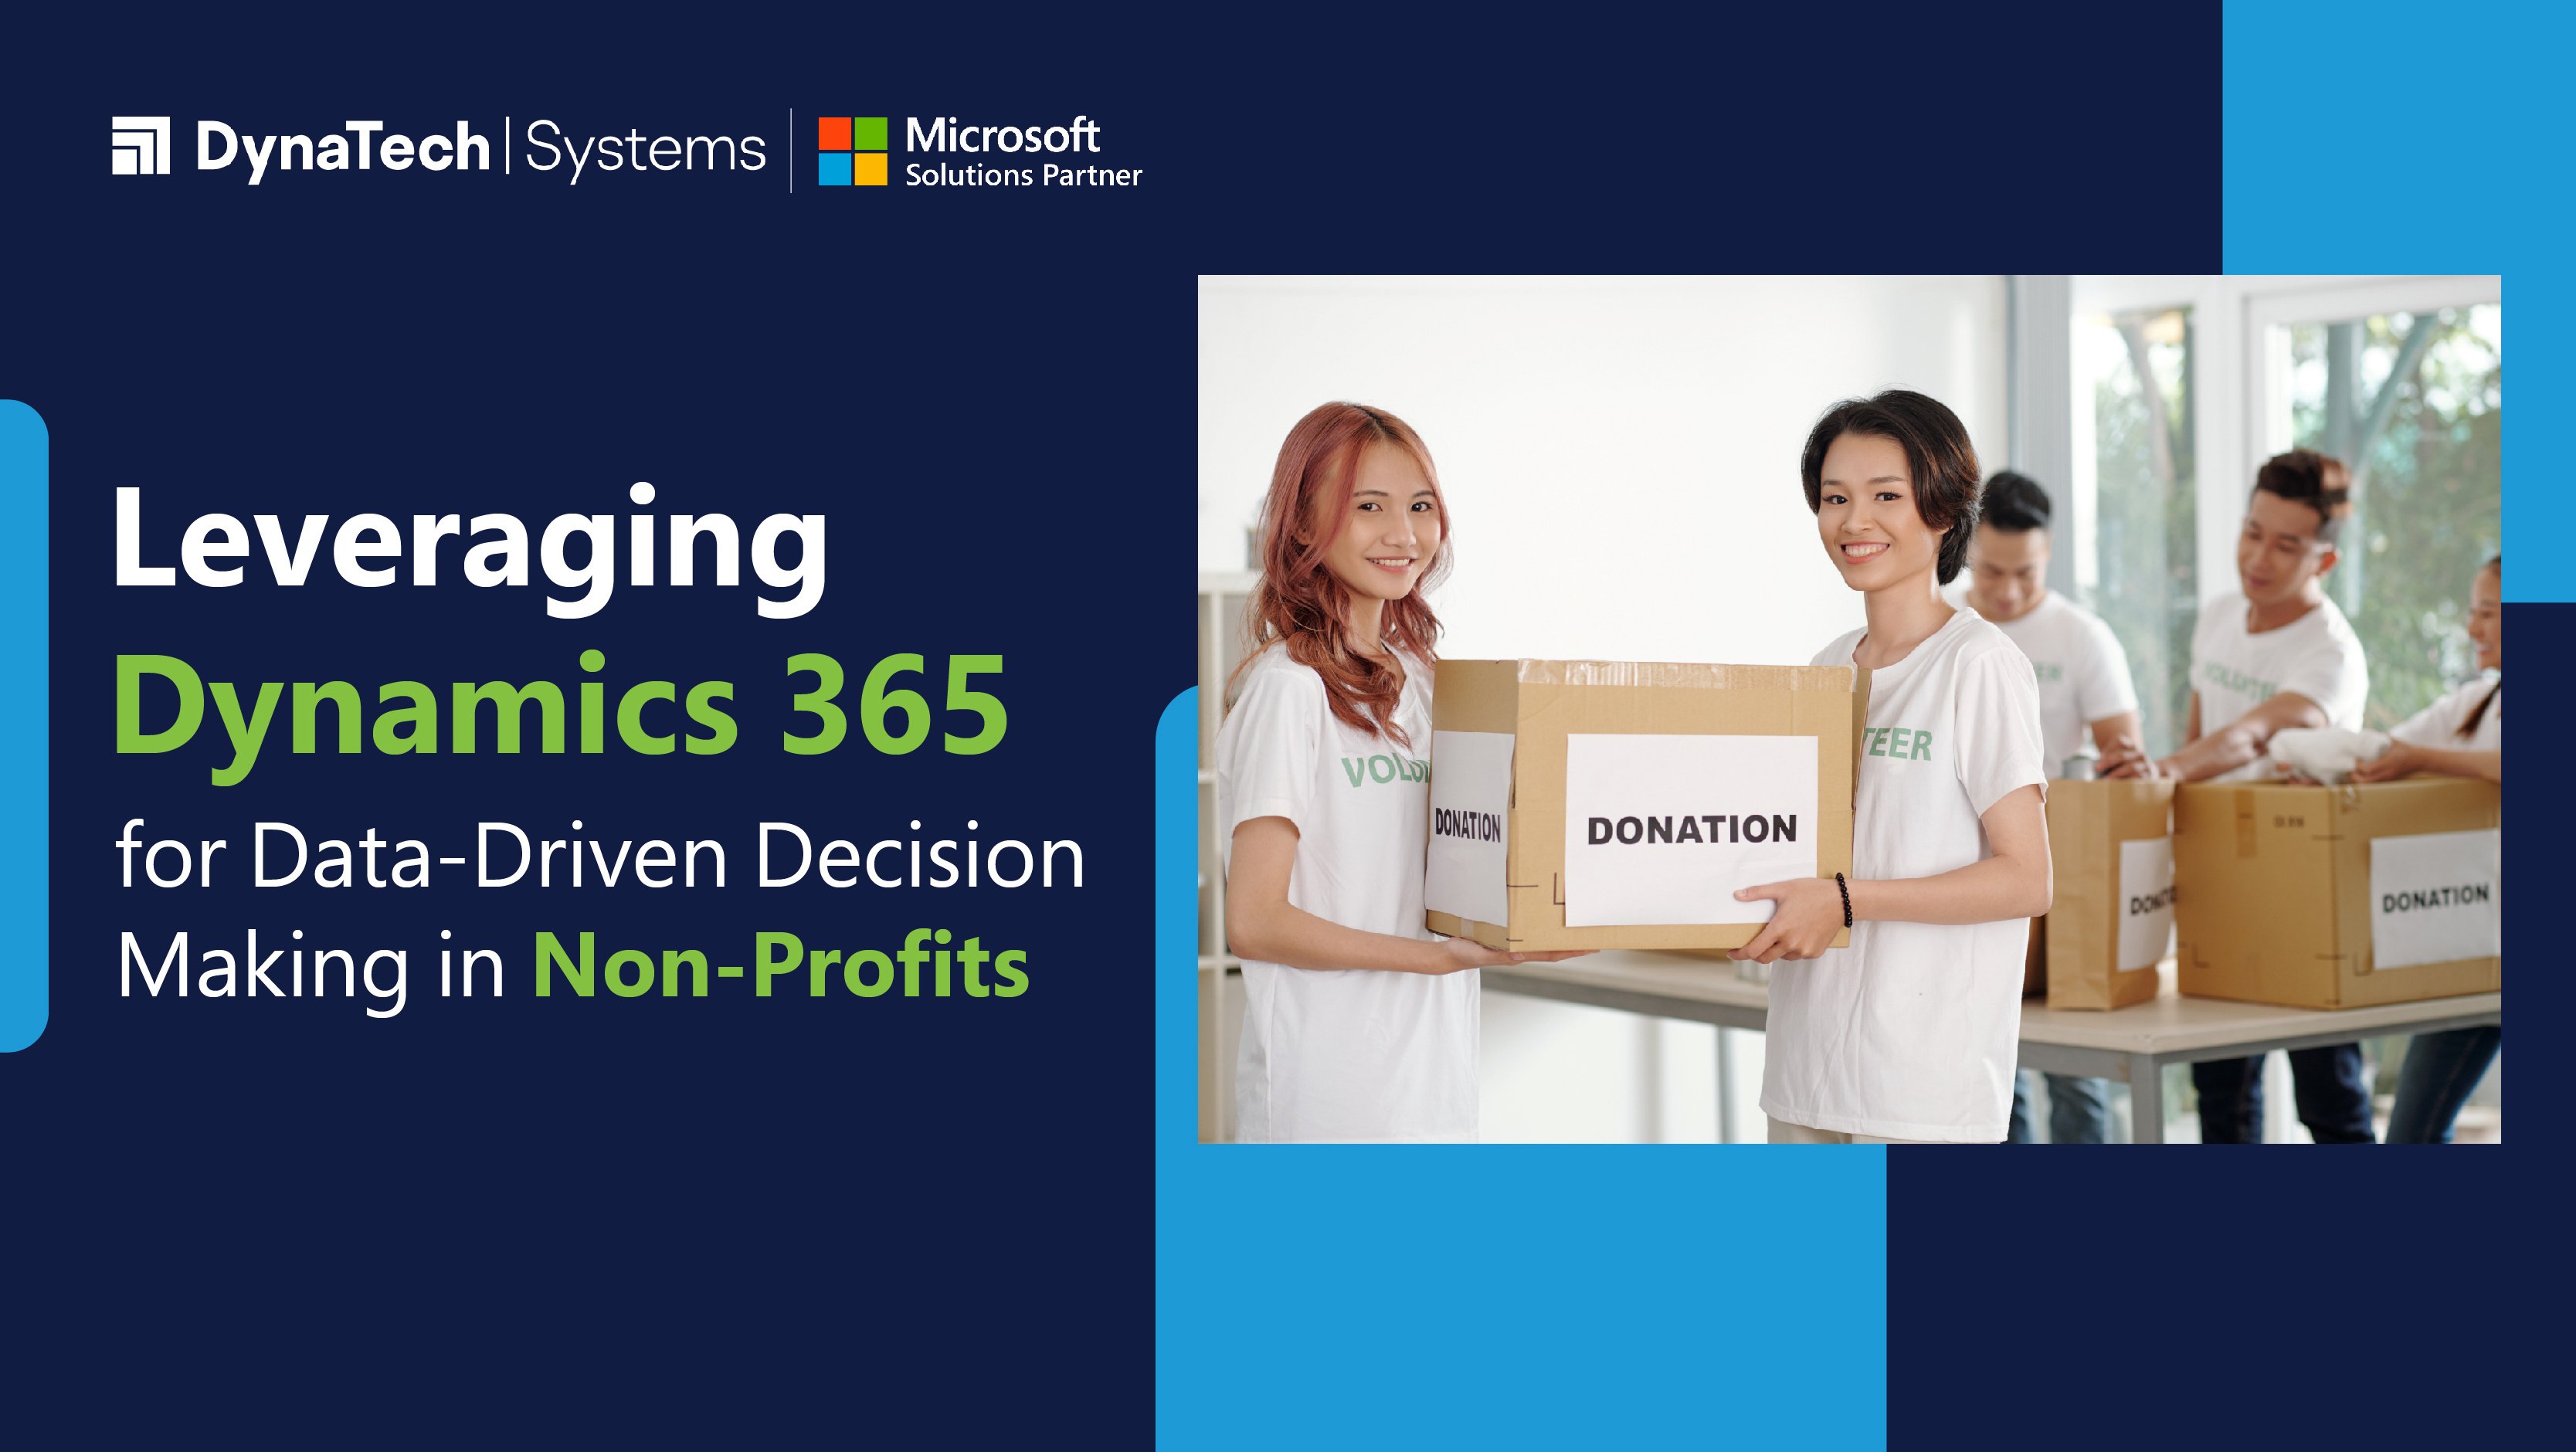 Leveraging Dynamics 365 for Data-Driven Decision-Making in Non-Profits